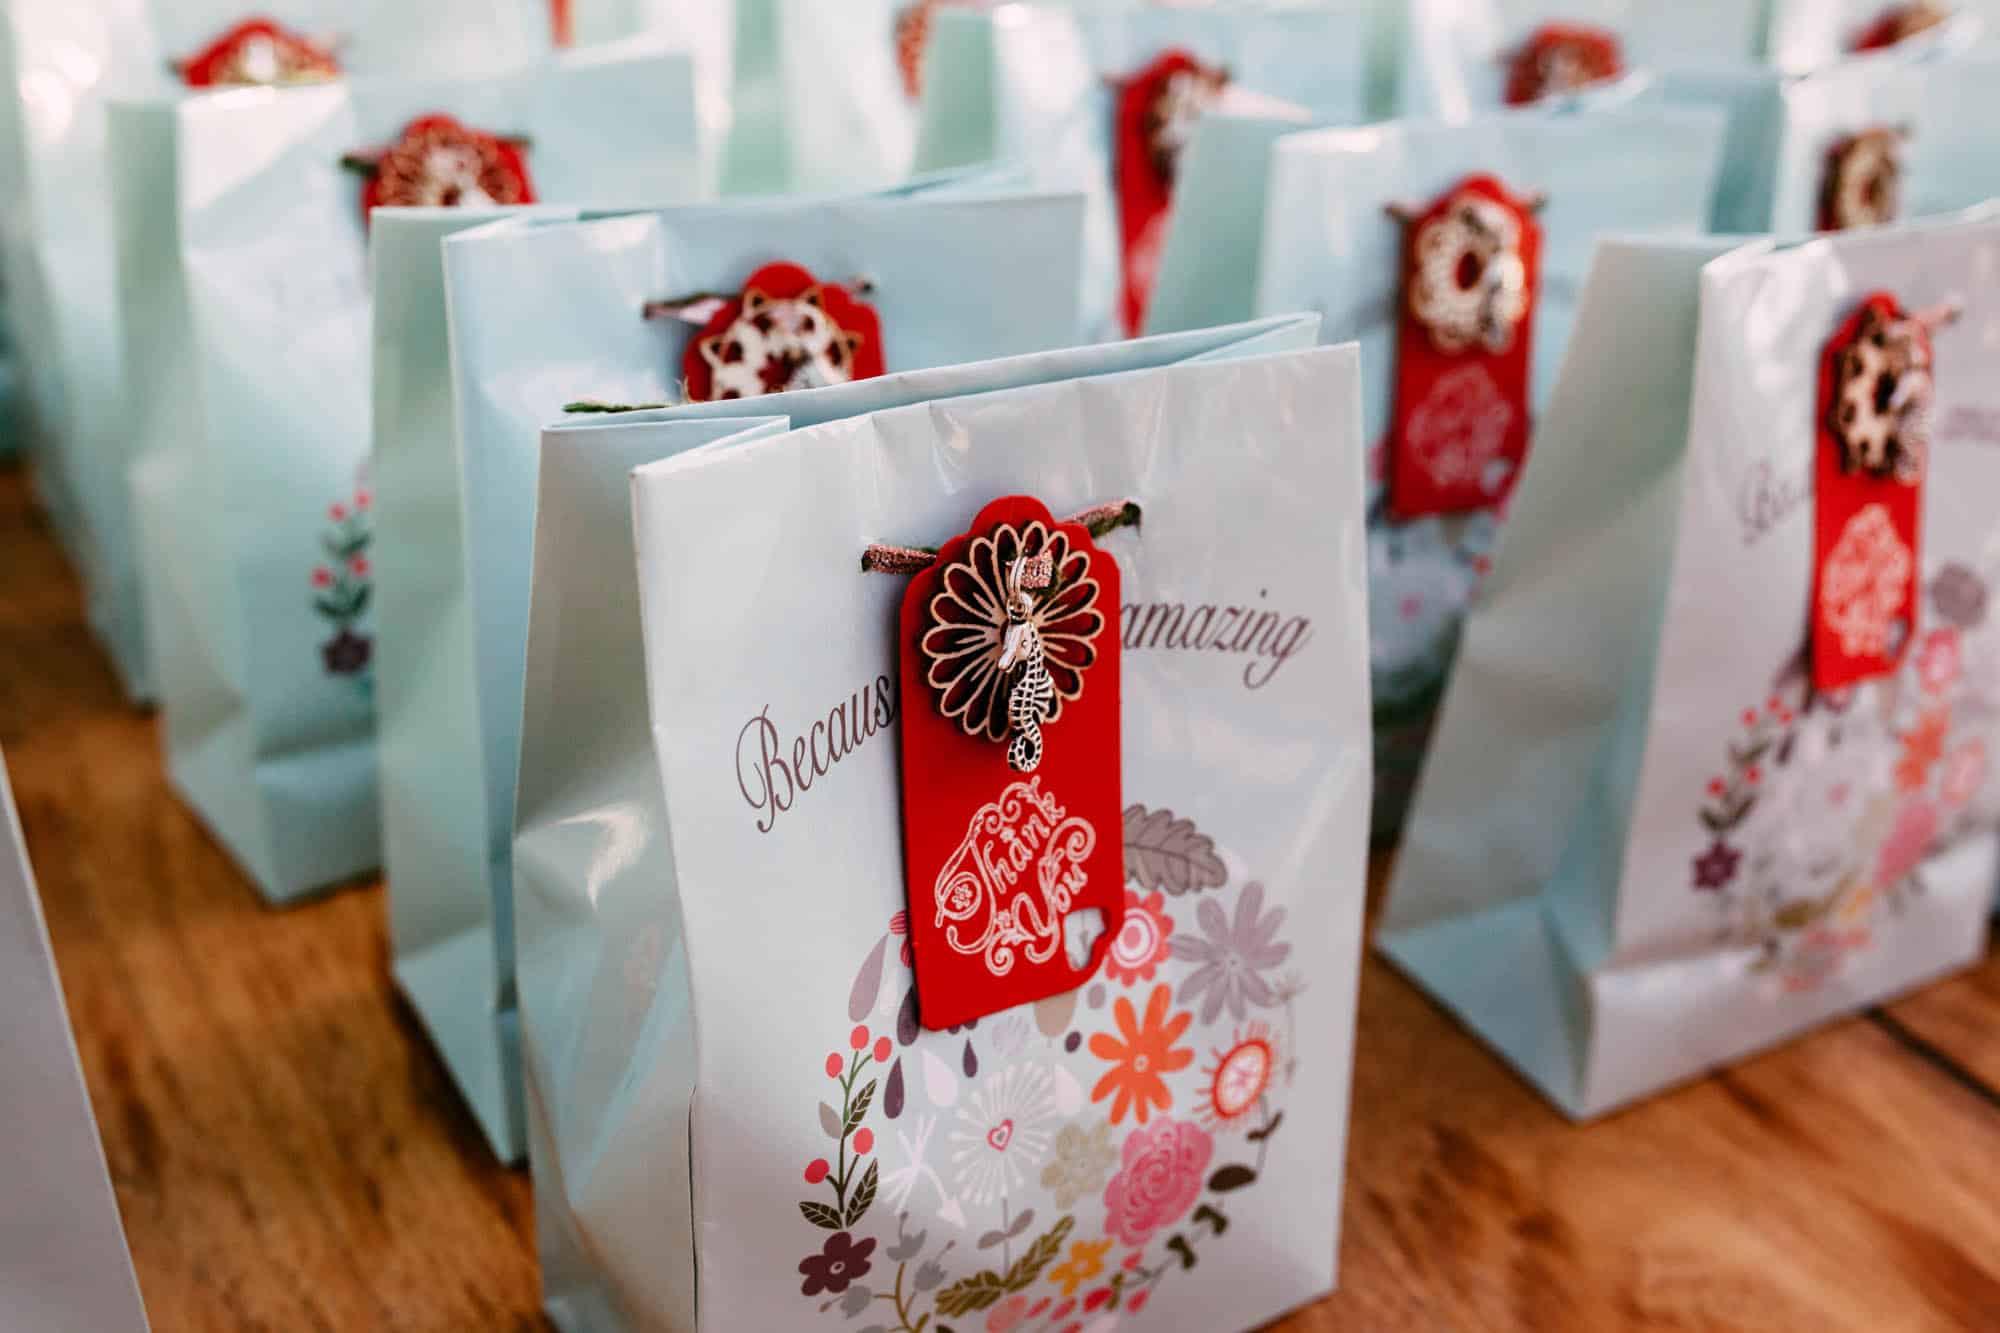 A row of gift bags with red and white ribbons, perfect for a wedding day gift.